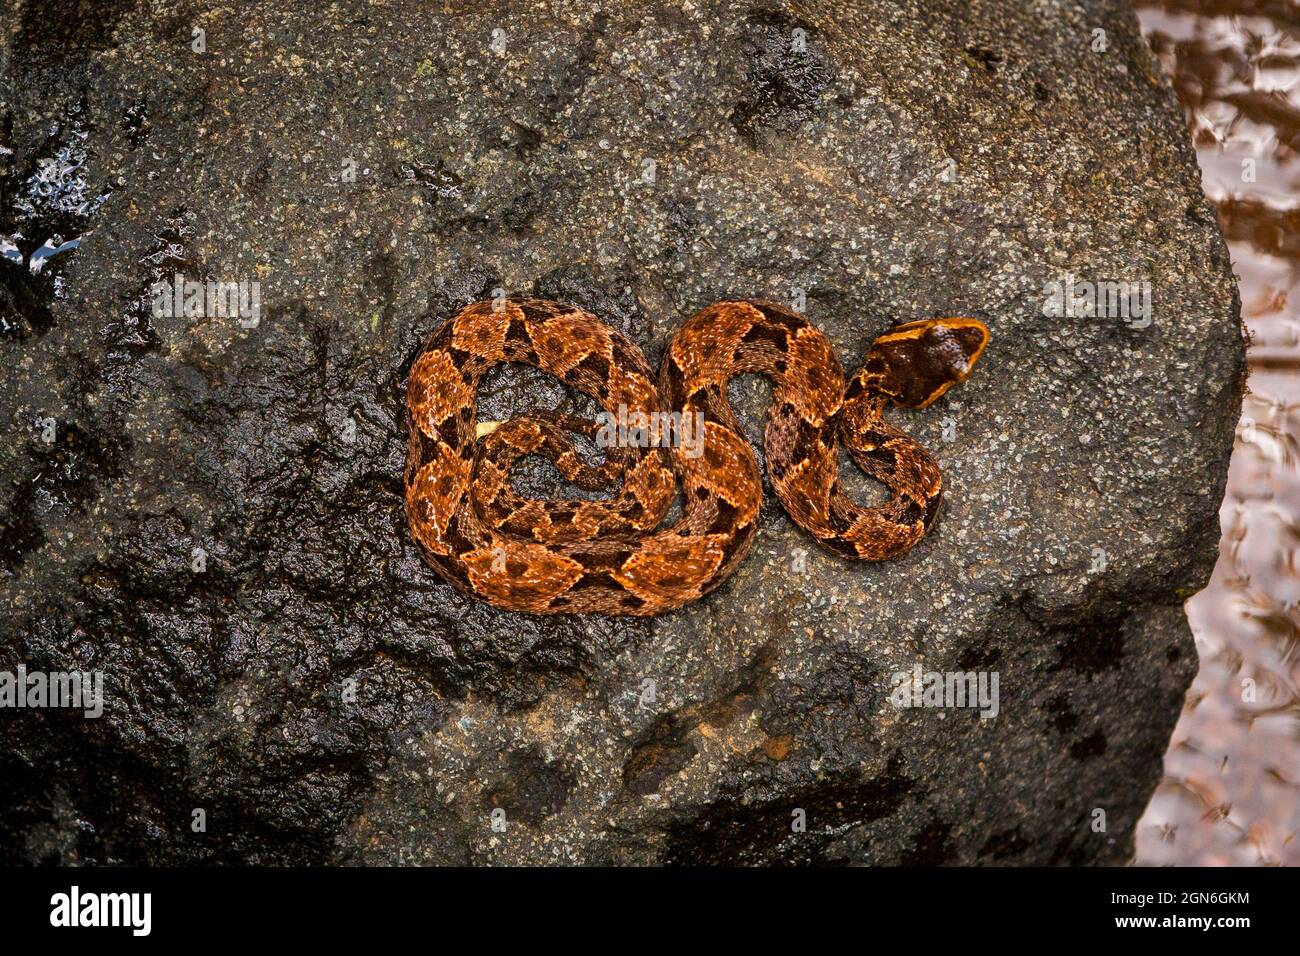 A venomous Fer-de-lance snake, Bothrops asper, on a rock in a small river along the old Camino Real trail, Chagres National Park, Republic of Panama. Stock Photo